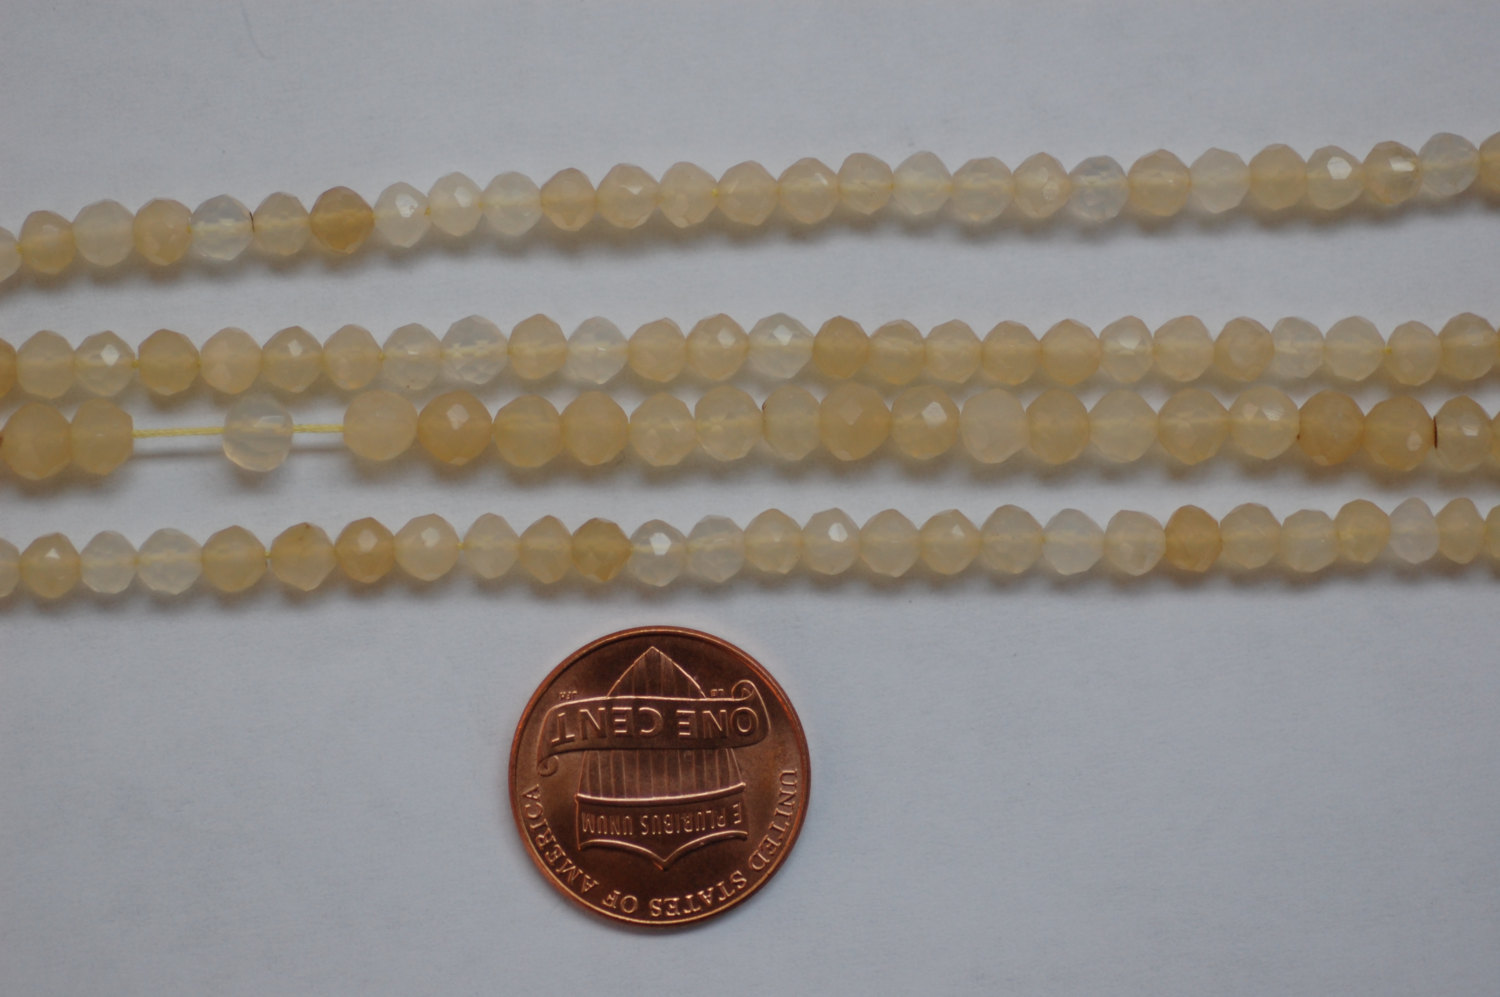 Golden Shaded Chalcedony Rounds Faceted